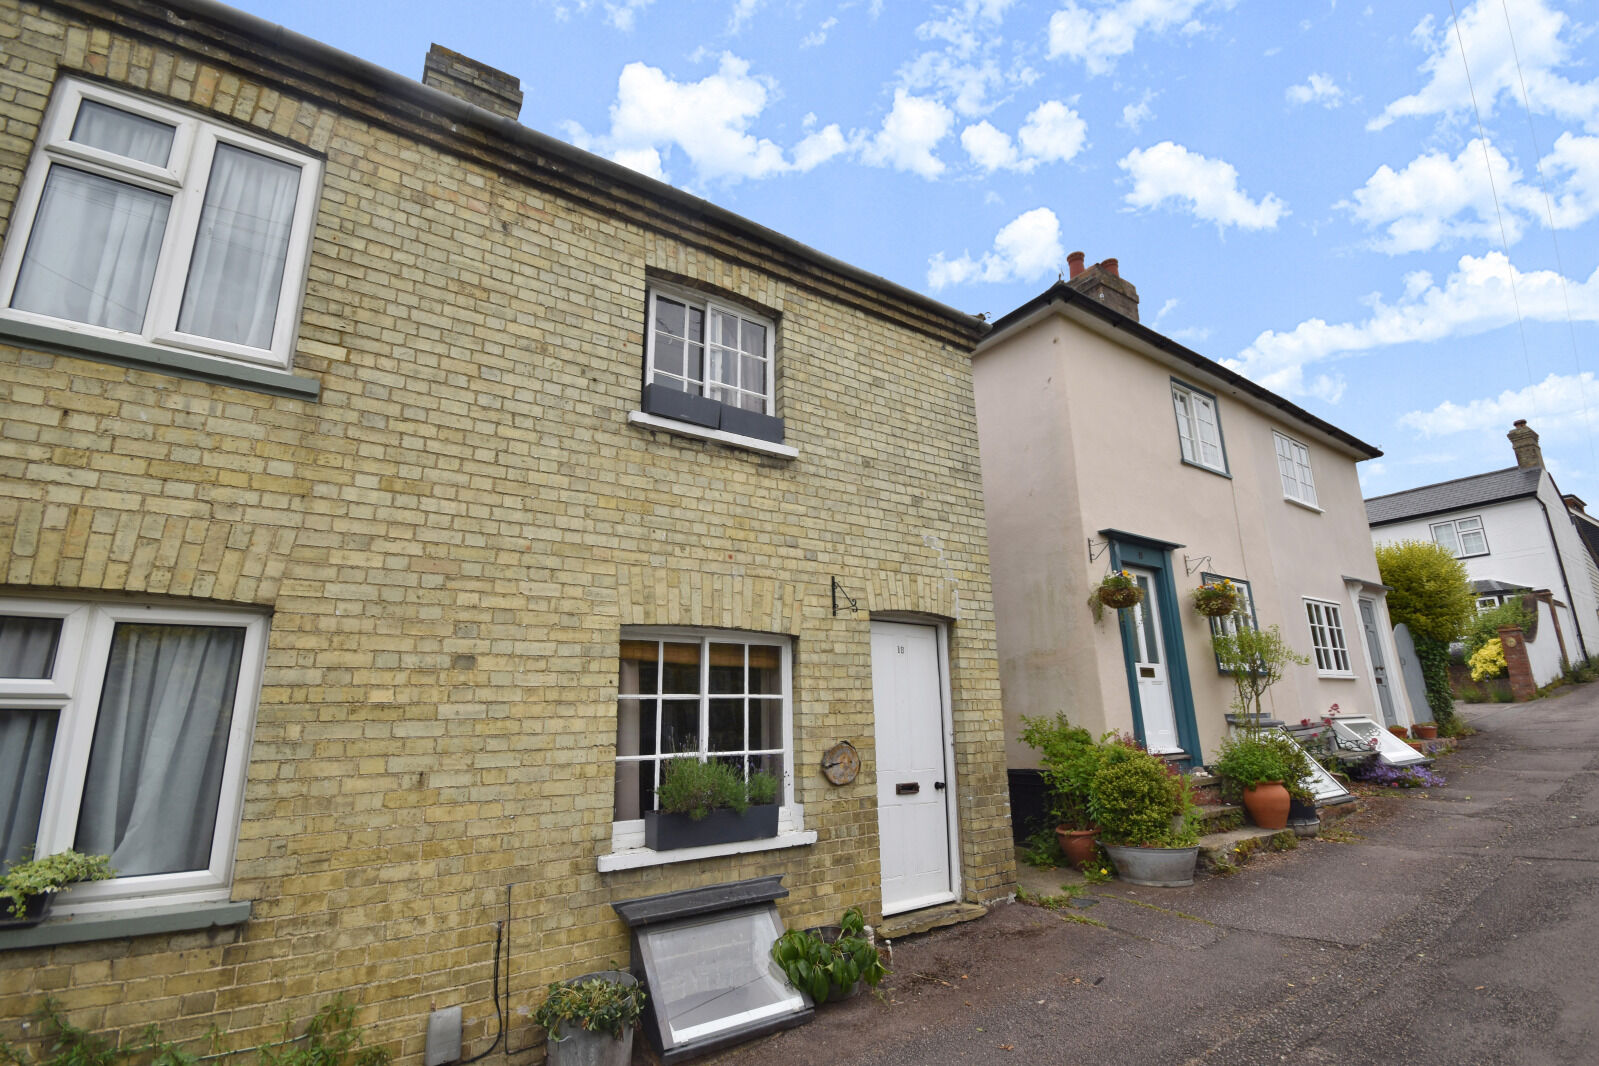 2 bedroom semi detached house to rent, Available from 26/07/2024 Mill Lane, Saffron Walden, CB10, main image